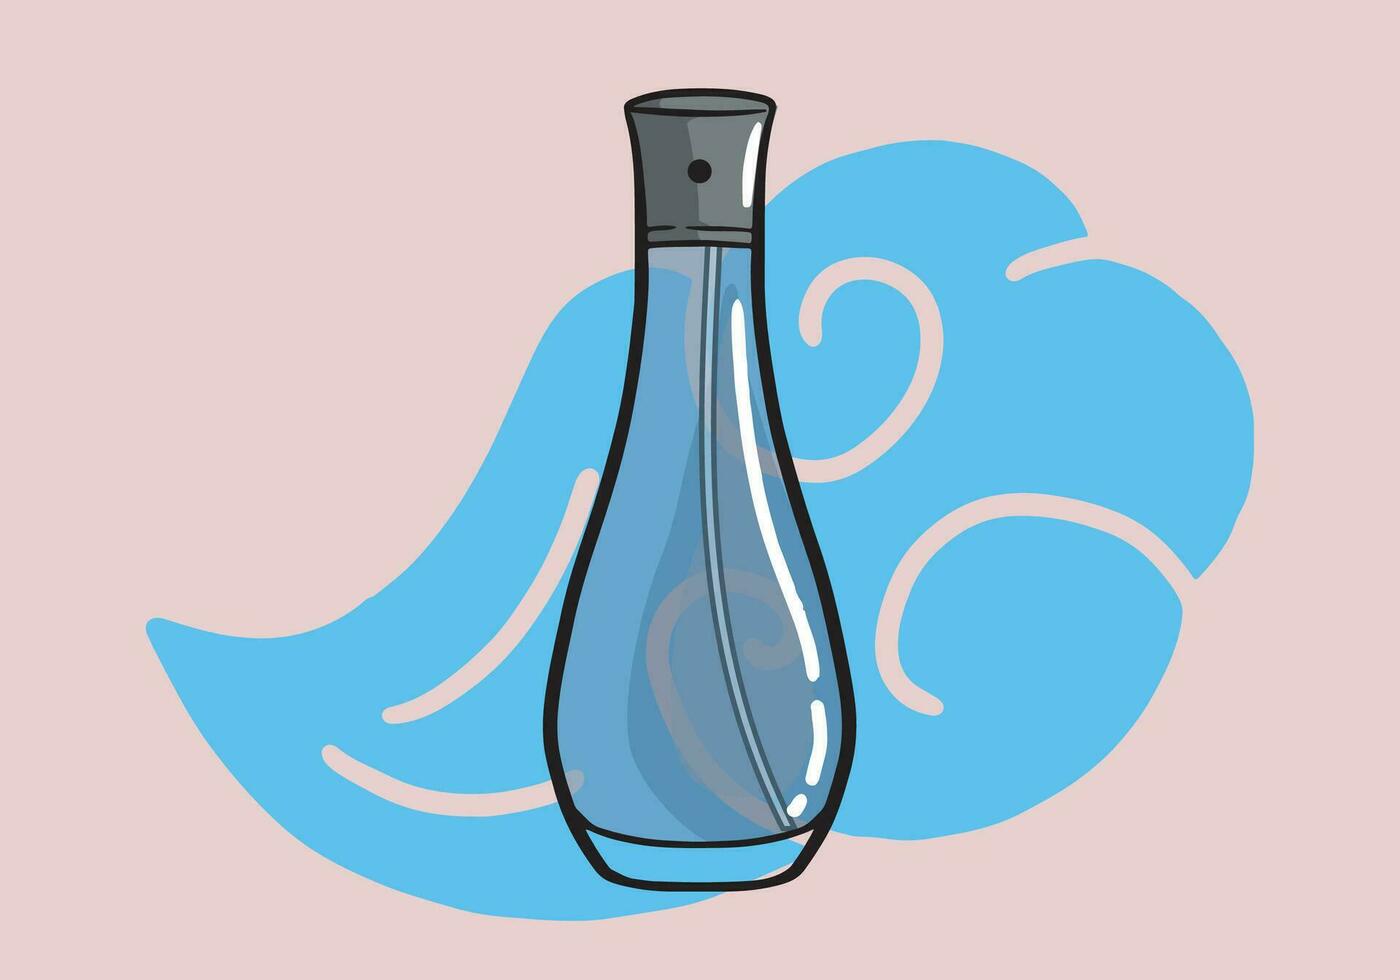 Perfume Bottle, Colorful Glass Vials and Flasks with Sprayer and Pump. Aroma Scents Cosmetics for Men or Women, Luxury Fragrances Isolated Design Elements. Cartoon Vector Illustration